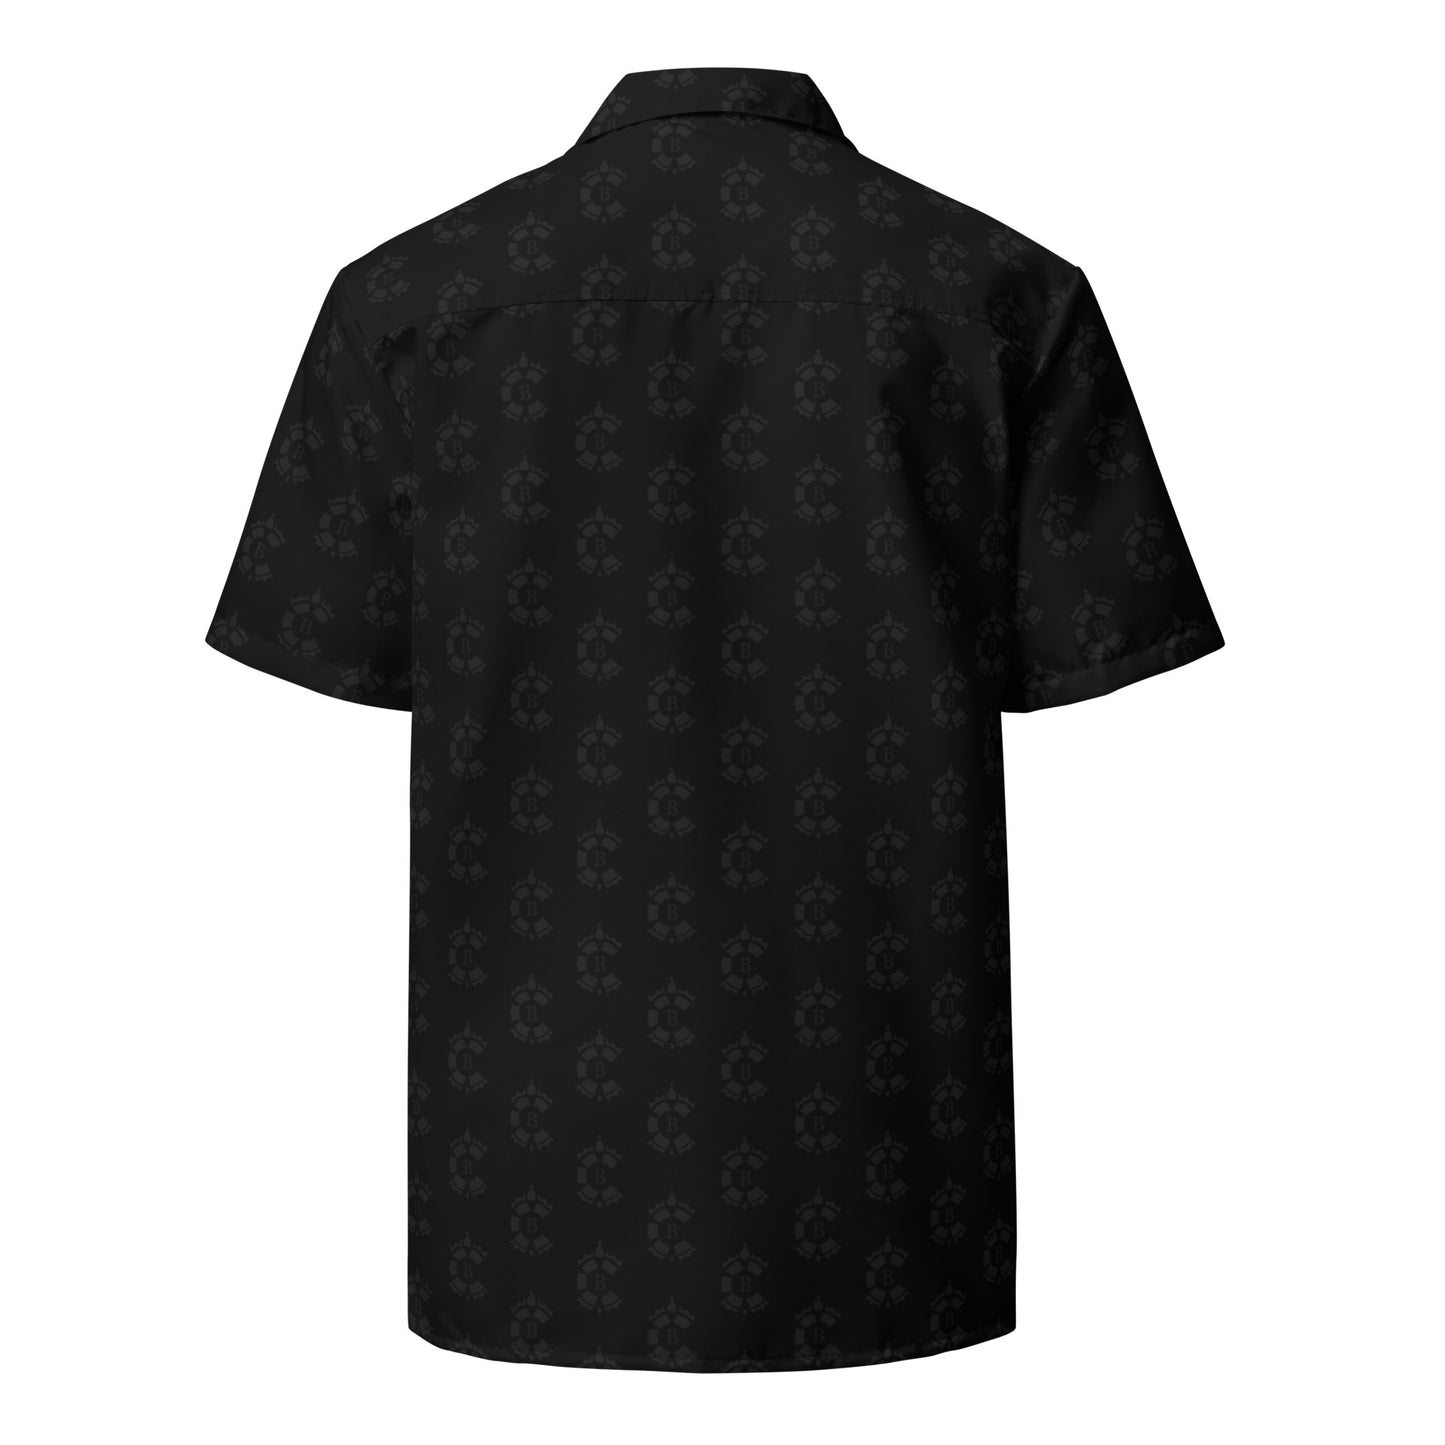 CONTRABRANDED R-Logos Button Up Short Sleeve Gray on Black